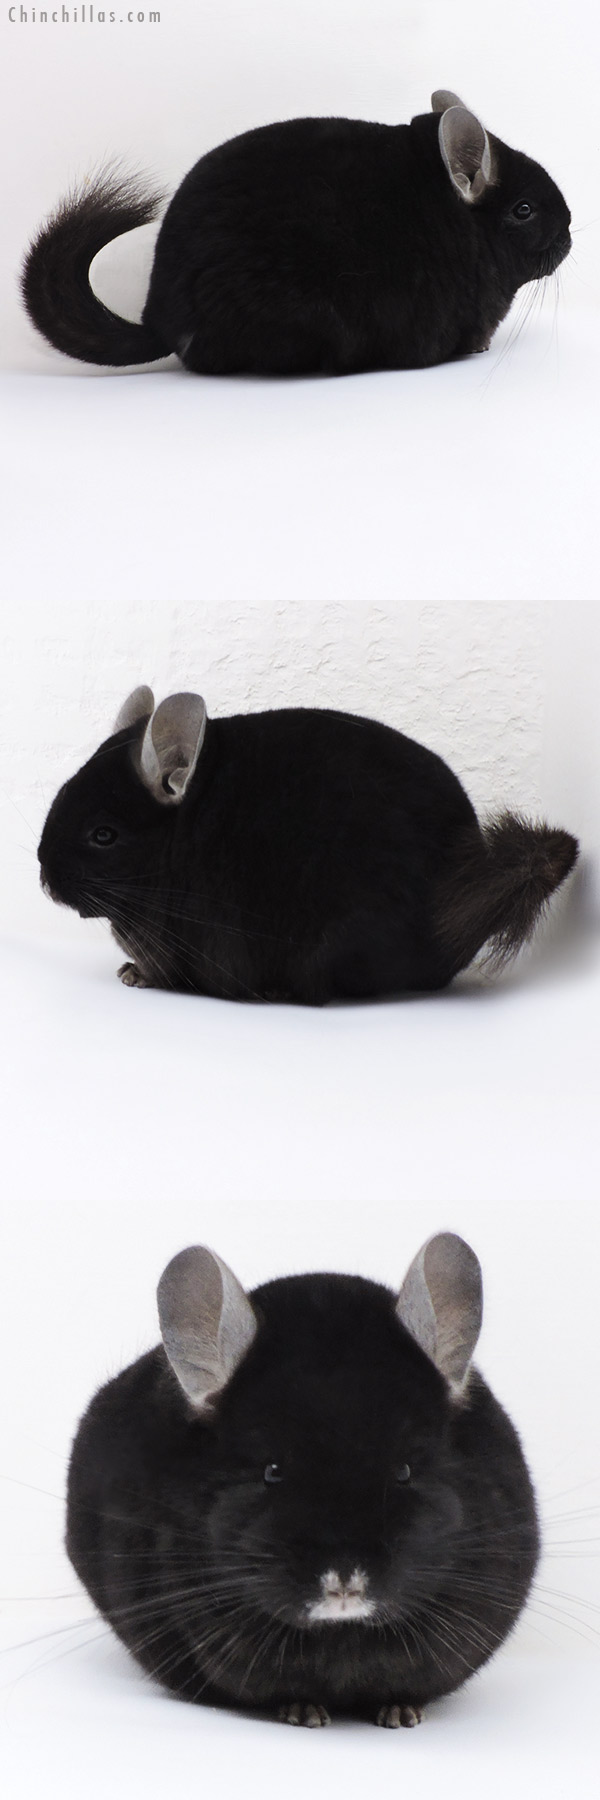 Chinchilla or related item offered for sale or export on Chinchillas.com - 17411 Blocky Premium Production Quality Ebony Female Chinchilla